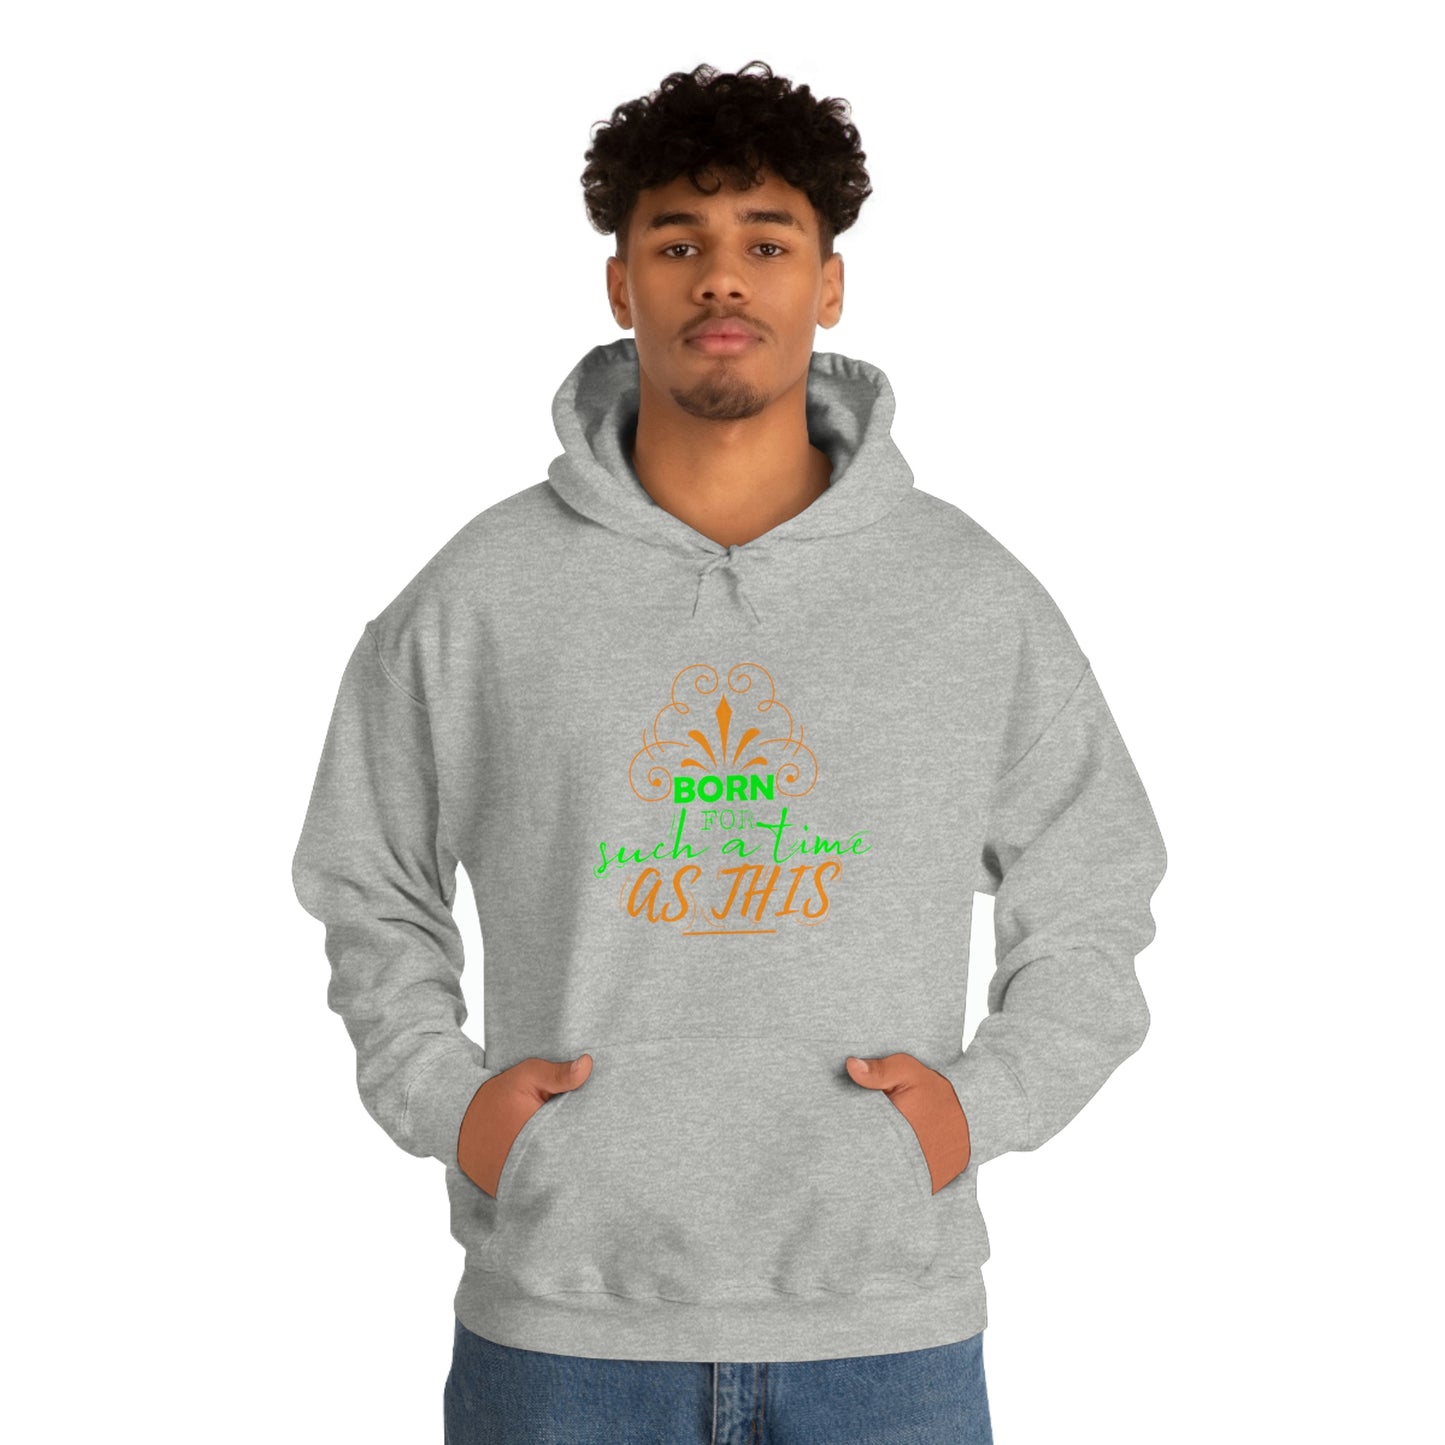 Born For Such A Time As This Unisex Pull On Hooded sweatshirt